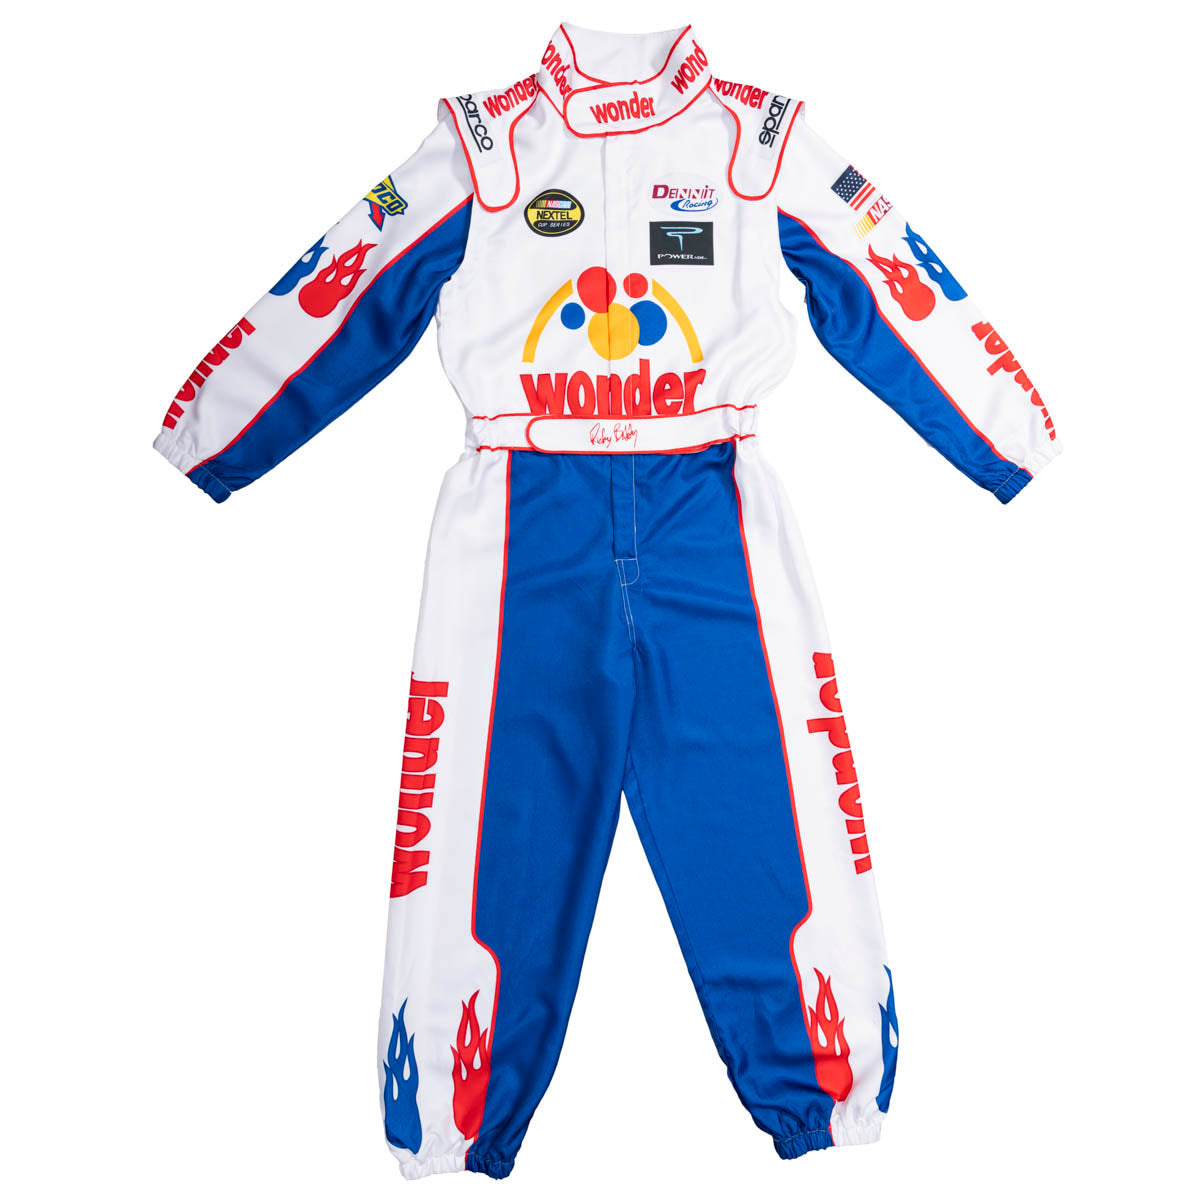 Talladega Nights: The Ballad of Ricky Bobby Racing Jumpsuit Costume Front View